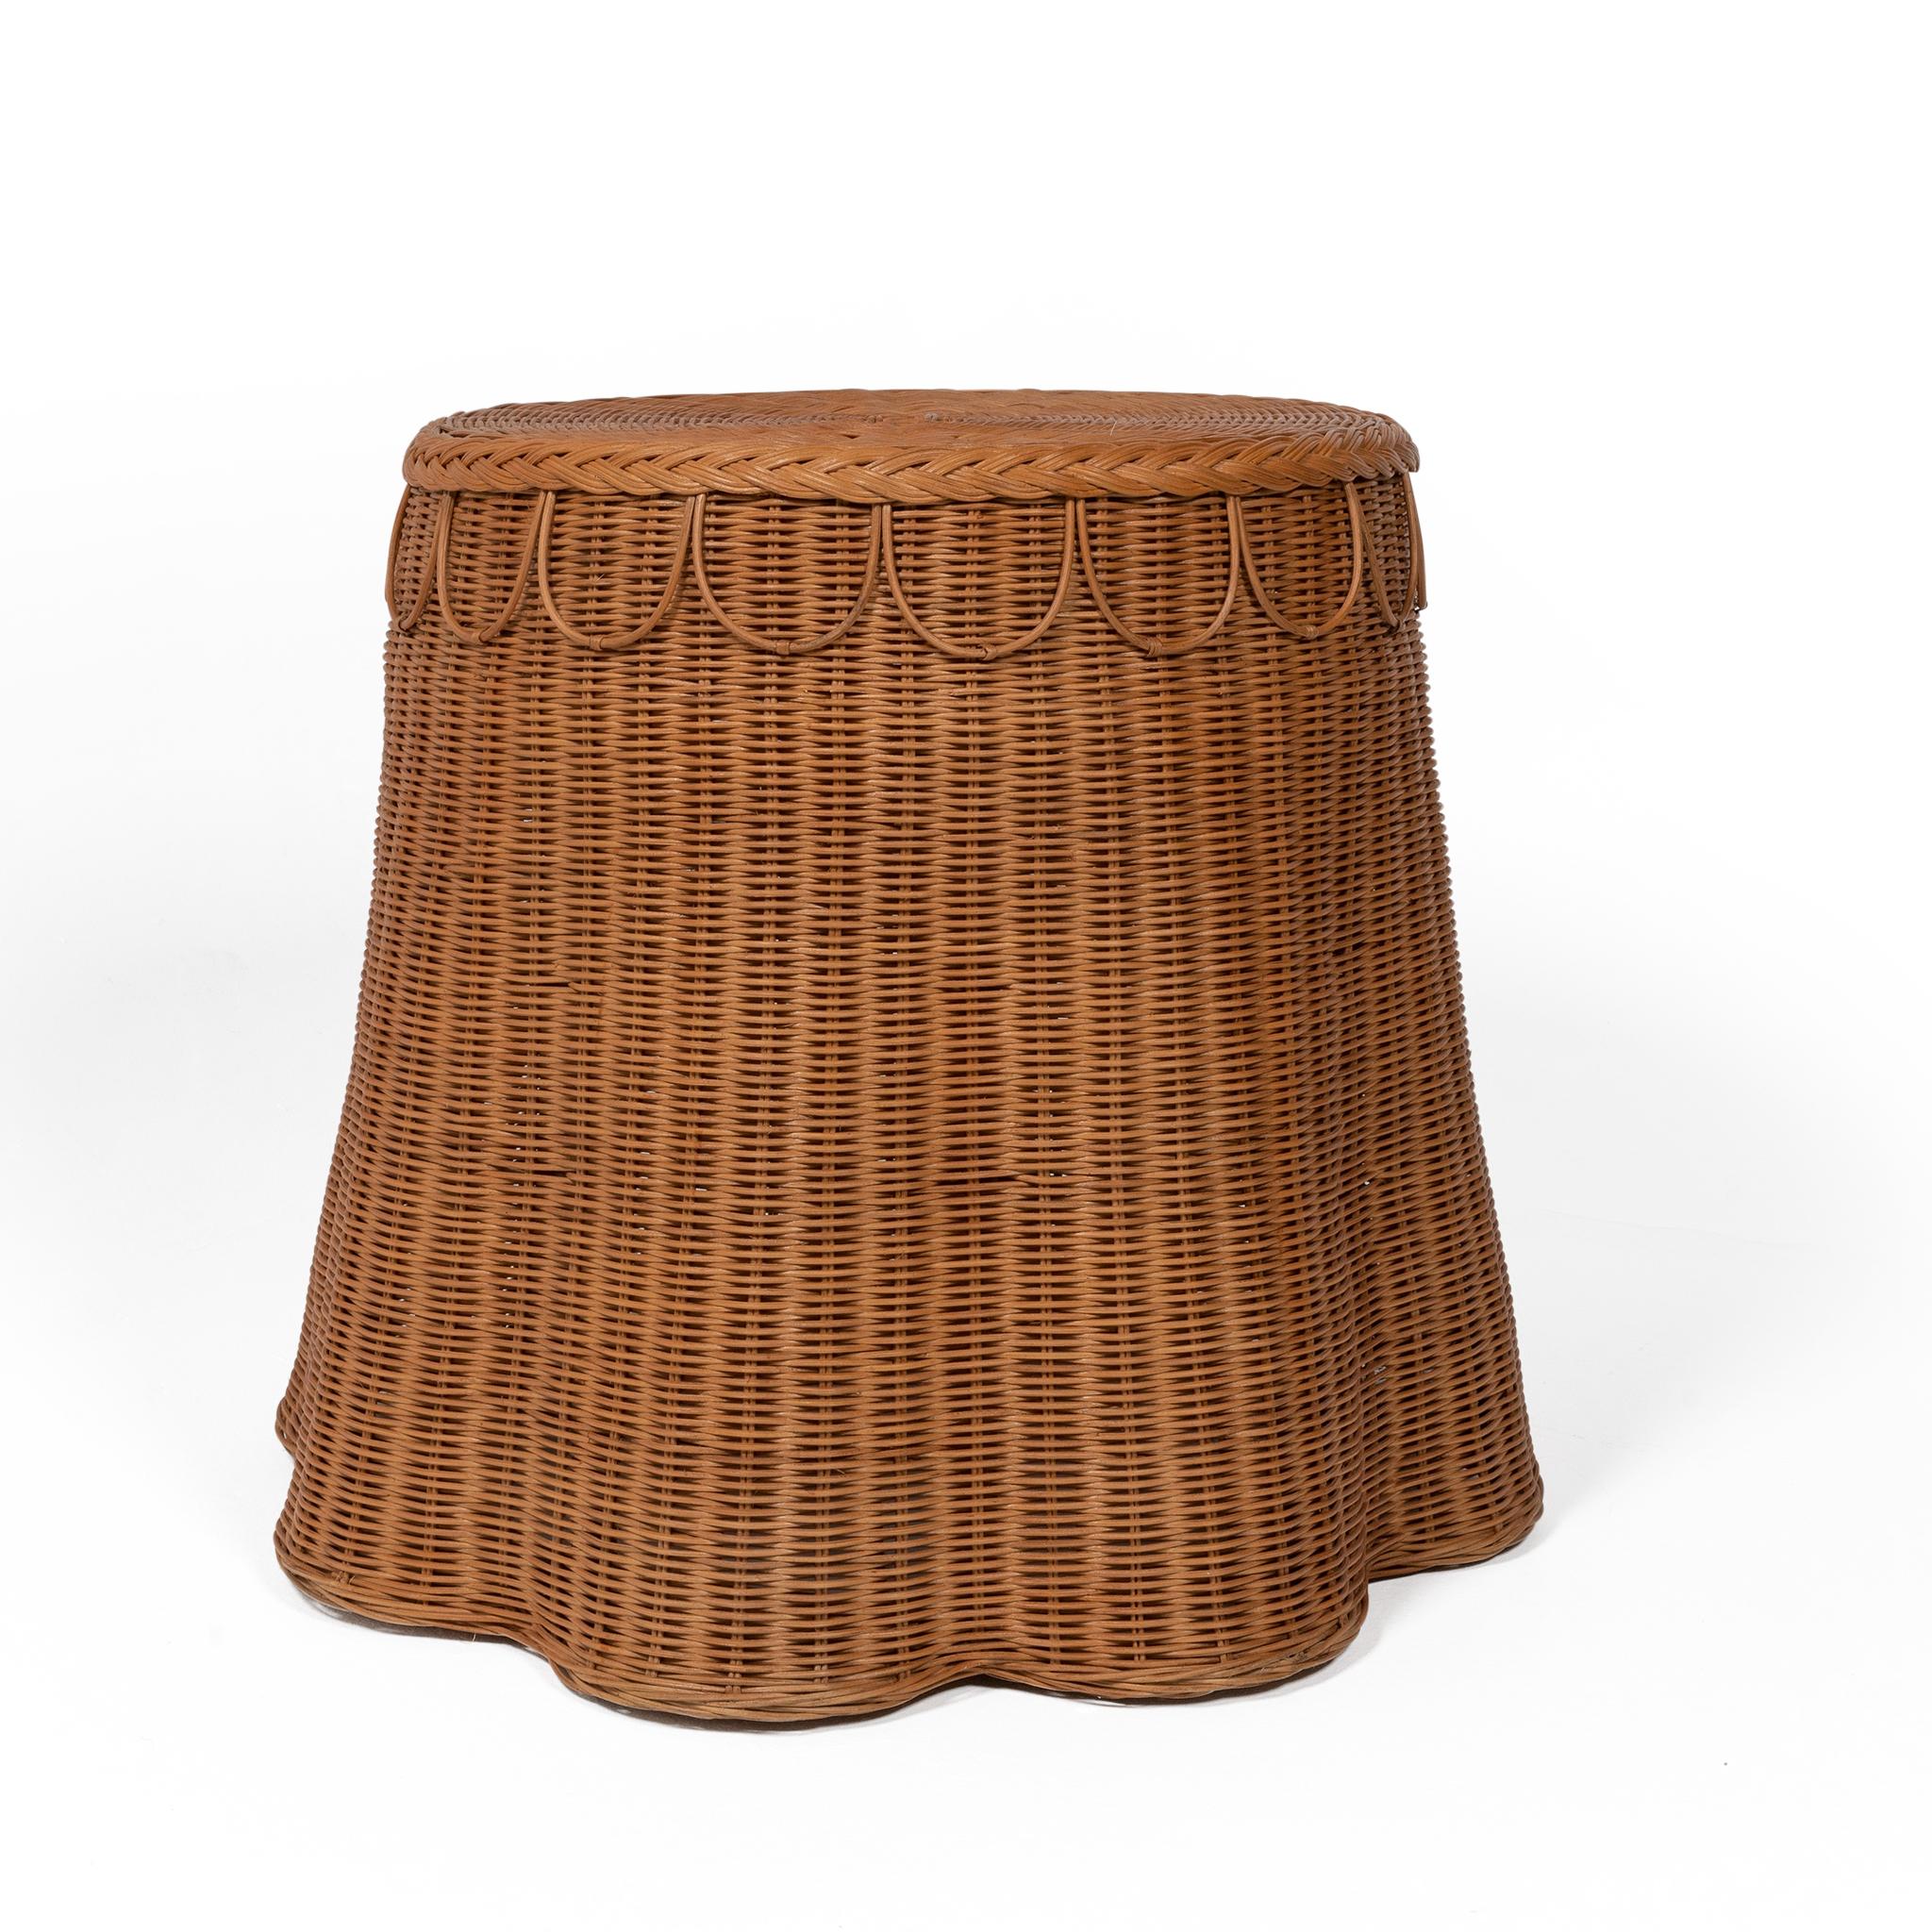 Indonesian Adeline Side Table in Natural Honey Rattan, Modern furniture by Louise Roe